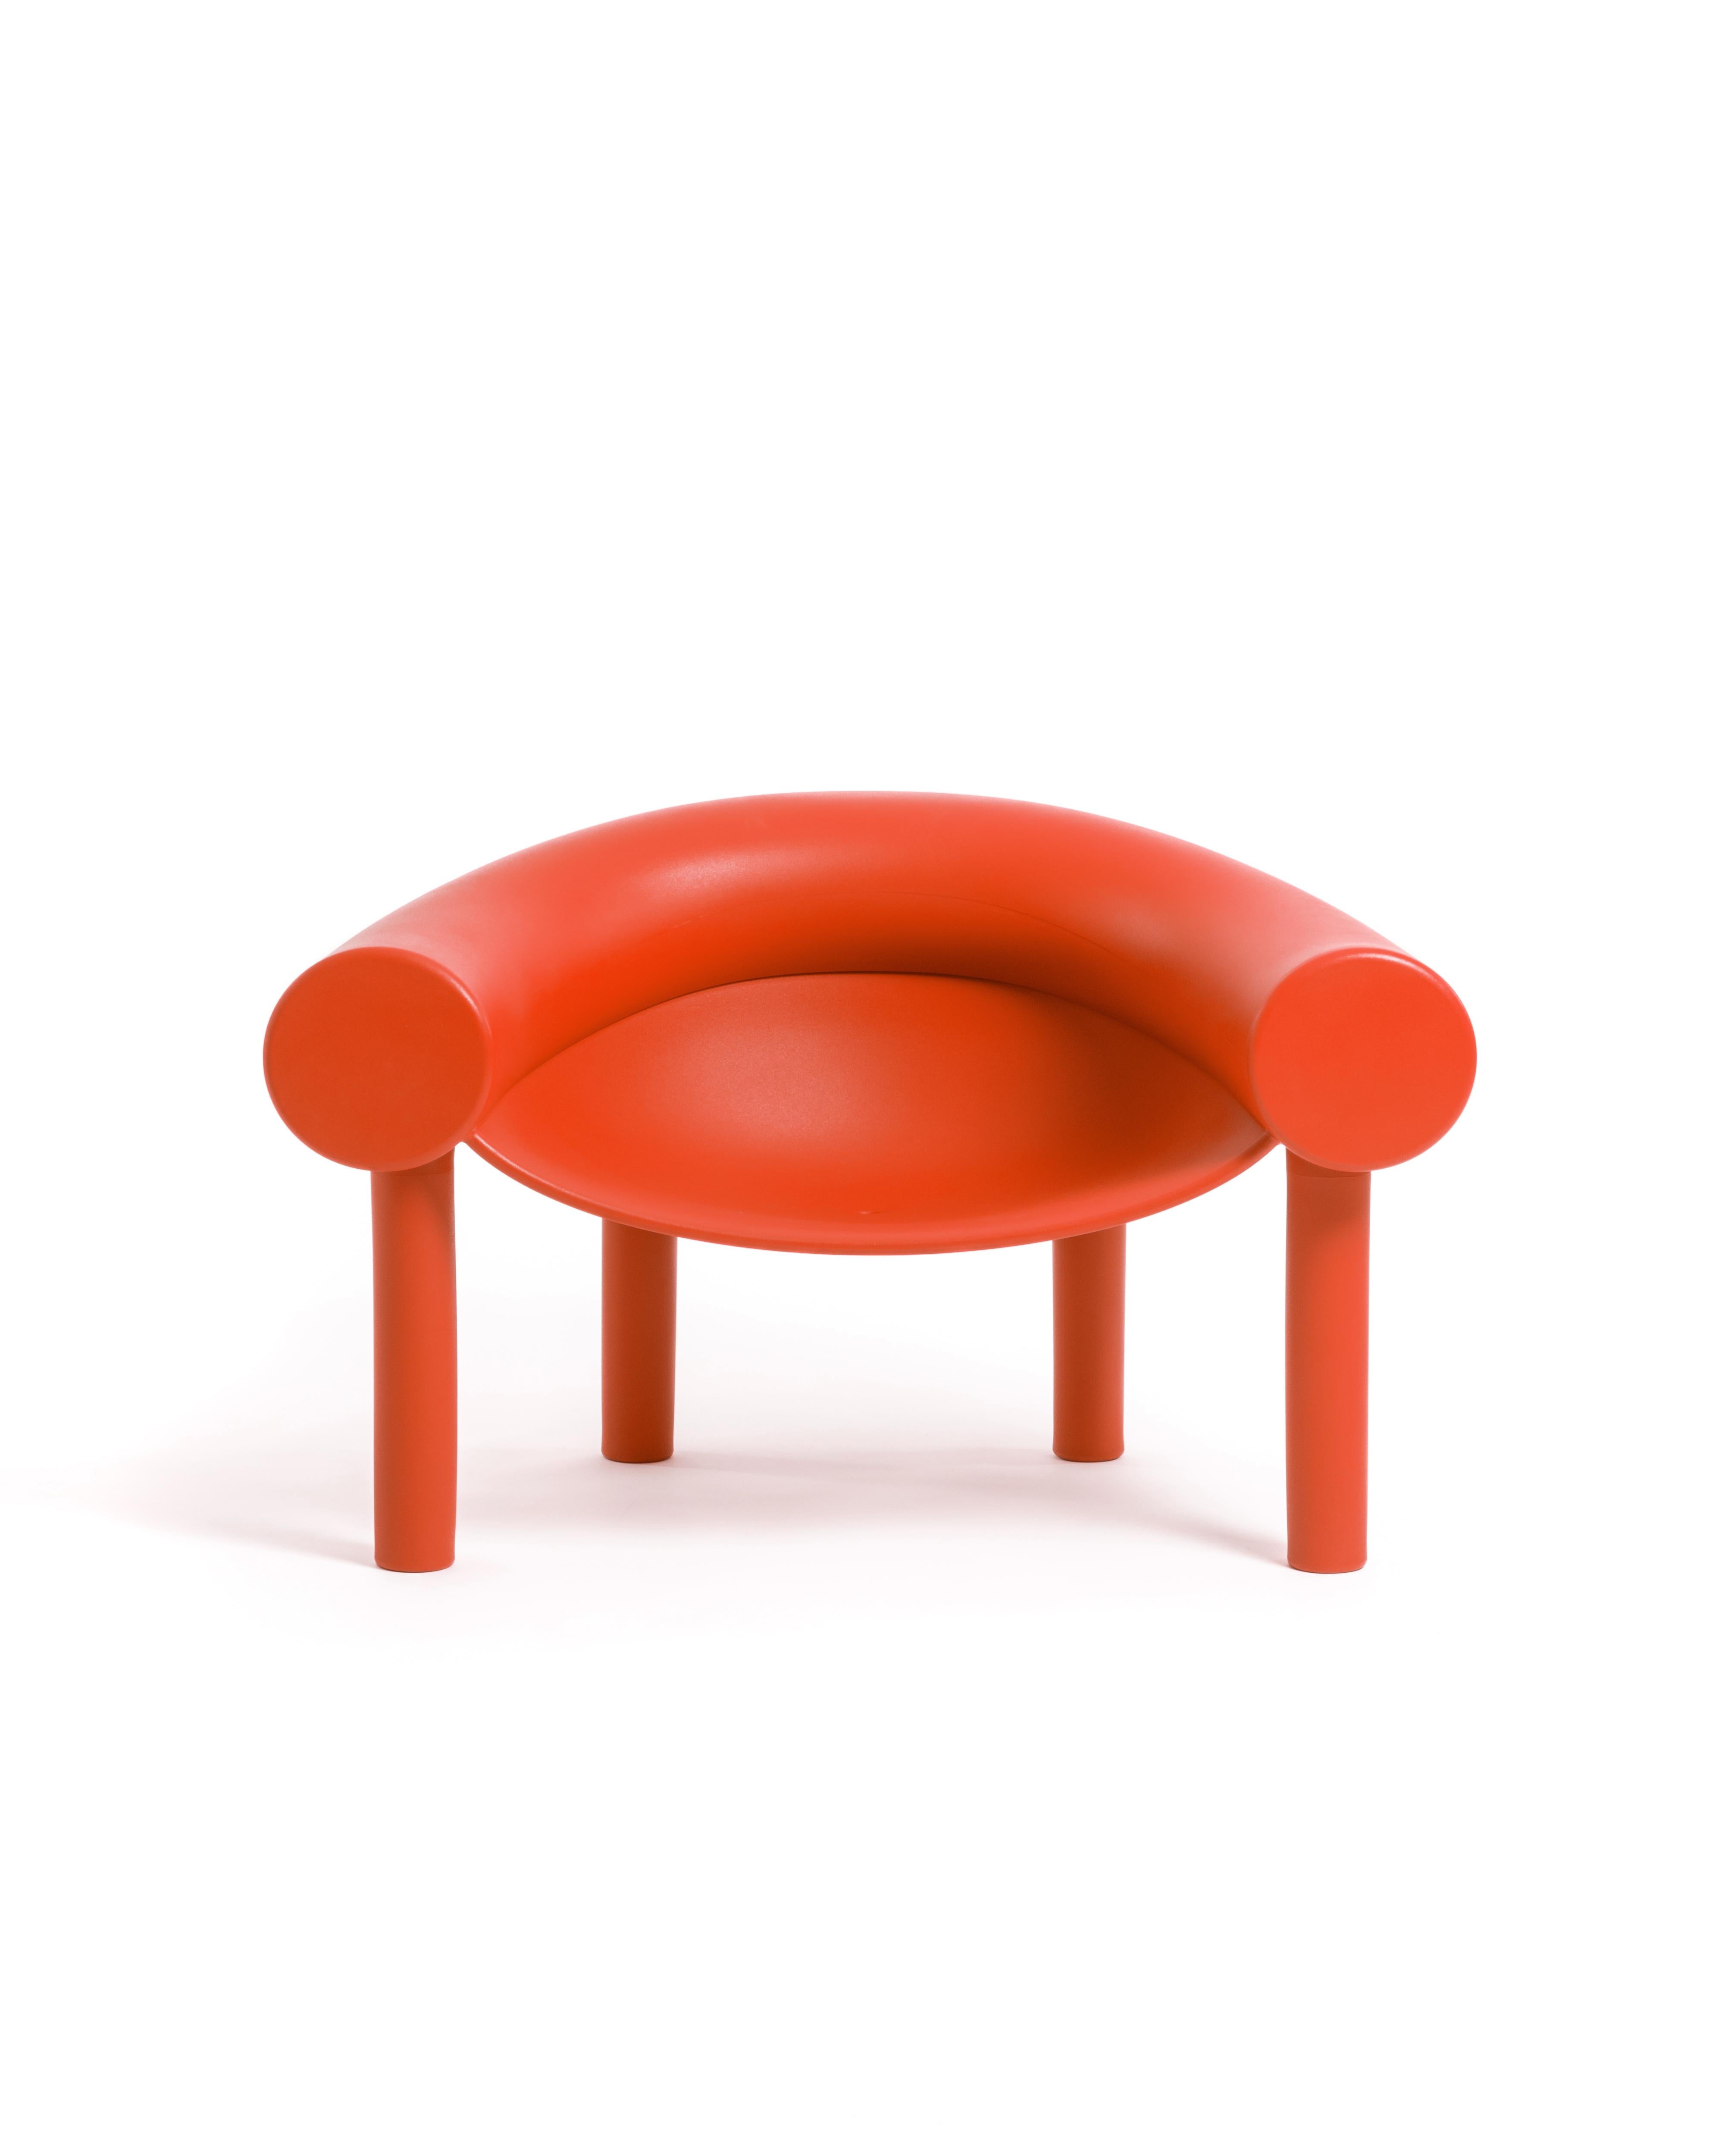 Sam Son Armchair in Red by Konstantin Grcic for MAGIS For Sale